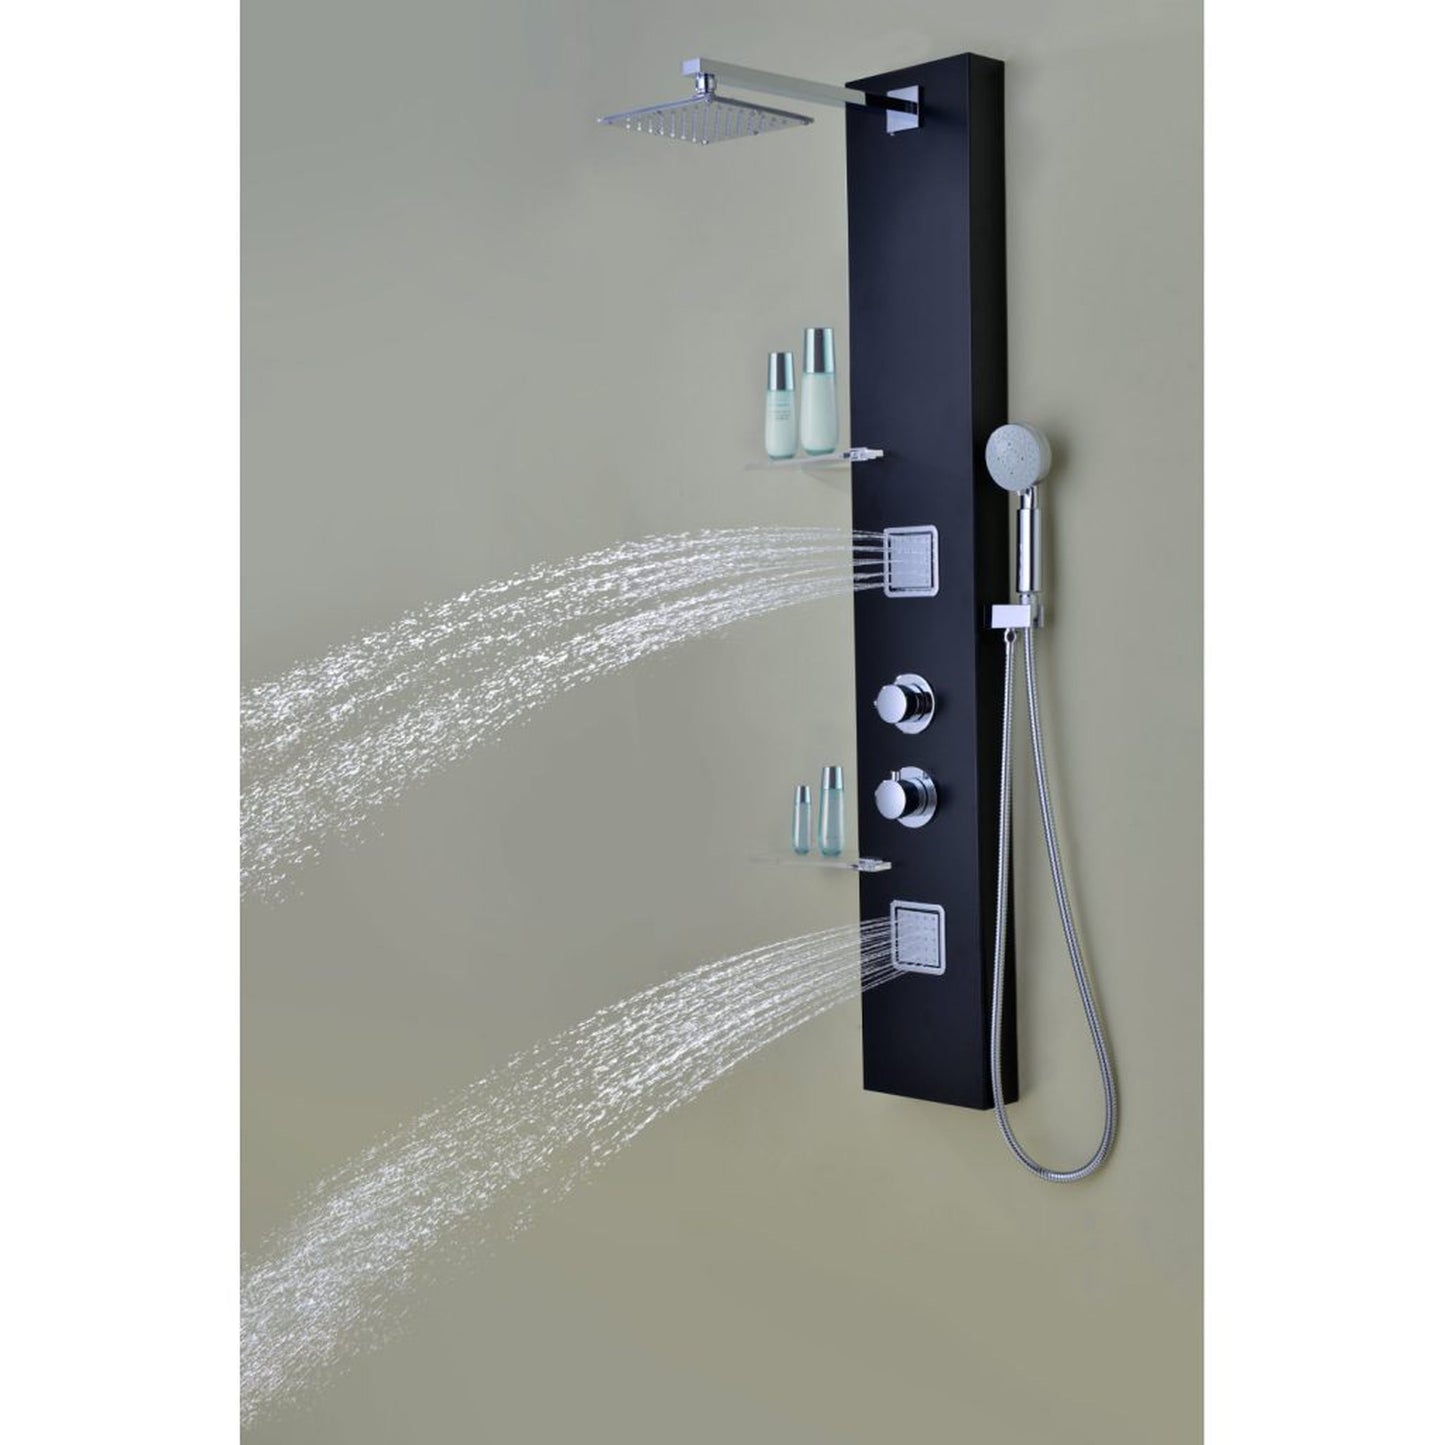 ANZZI Ronin Series 52" Black 2-Jetted Full Body Shower Panel With Heavy Rain Shower Head and Euro-Grip Hand Sprayer